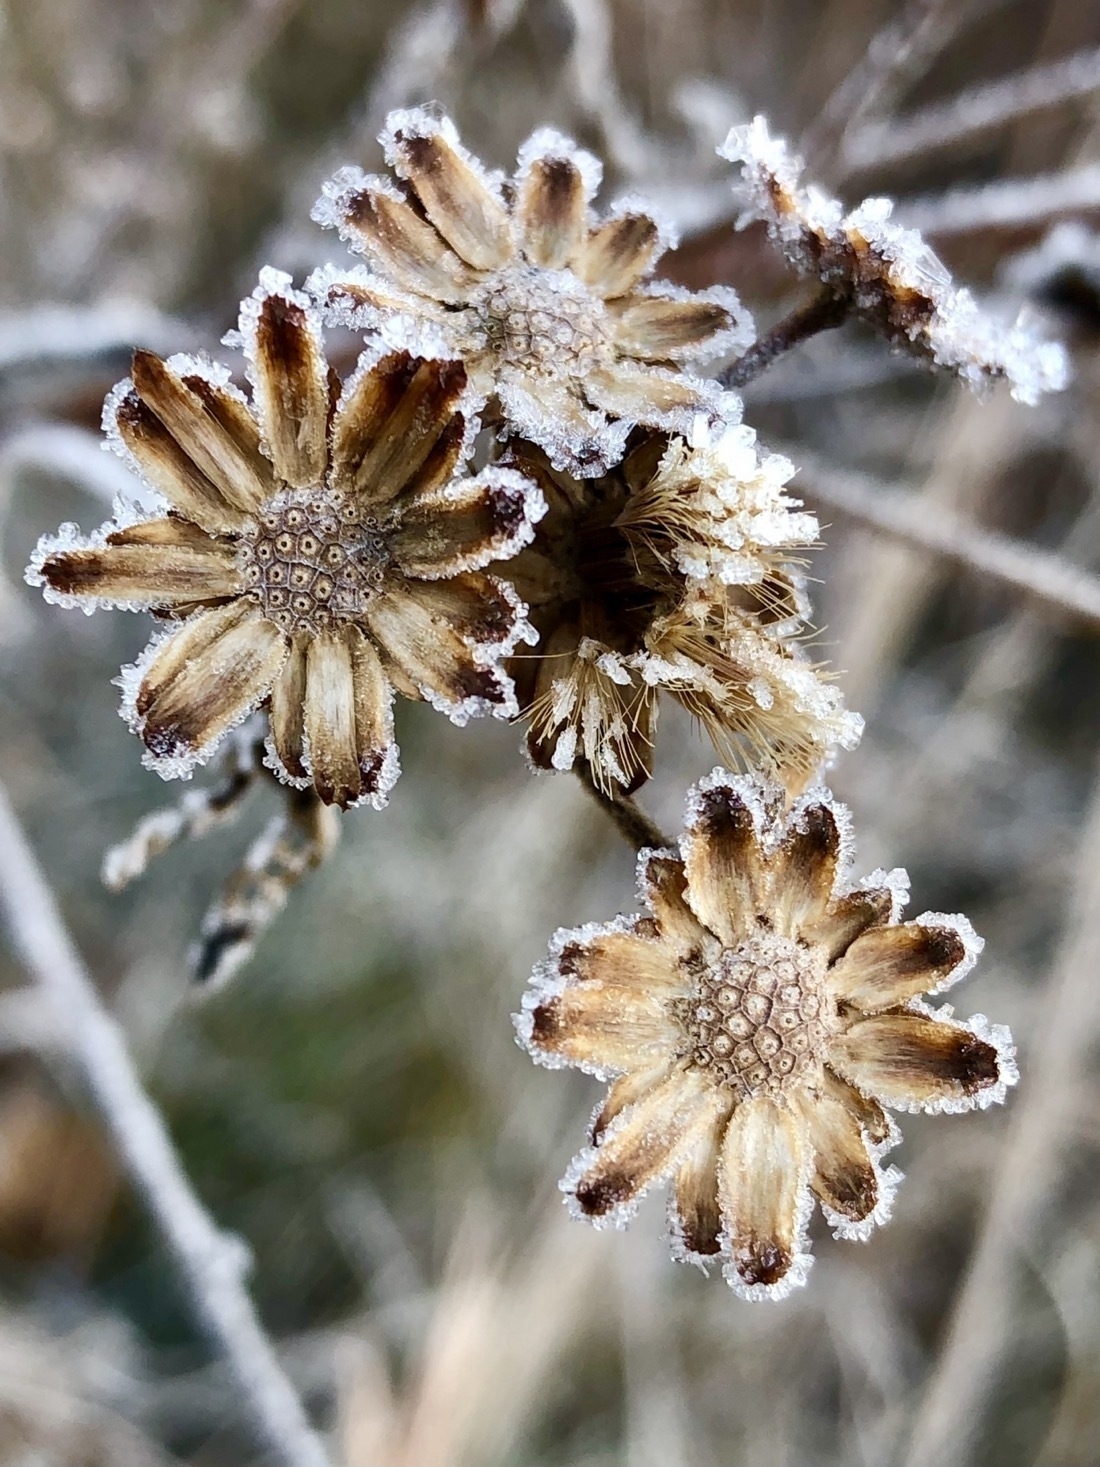 Ice crystals on  the golden brown remains of summer flowers 